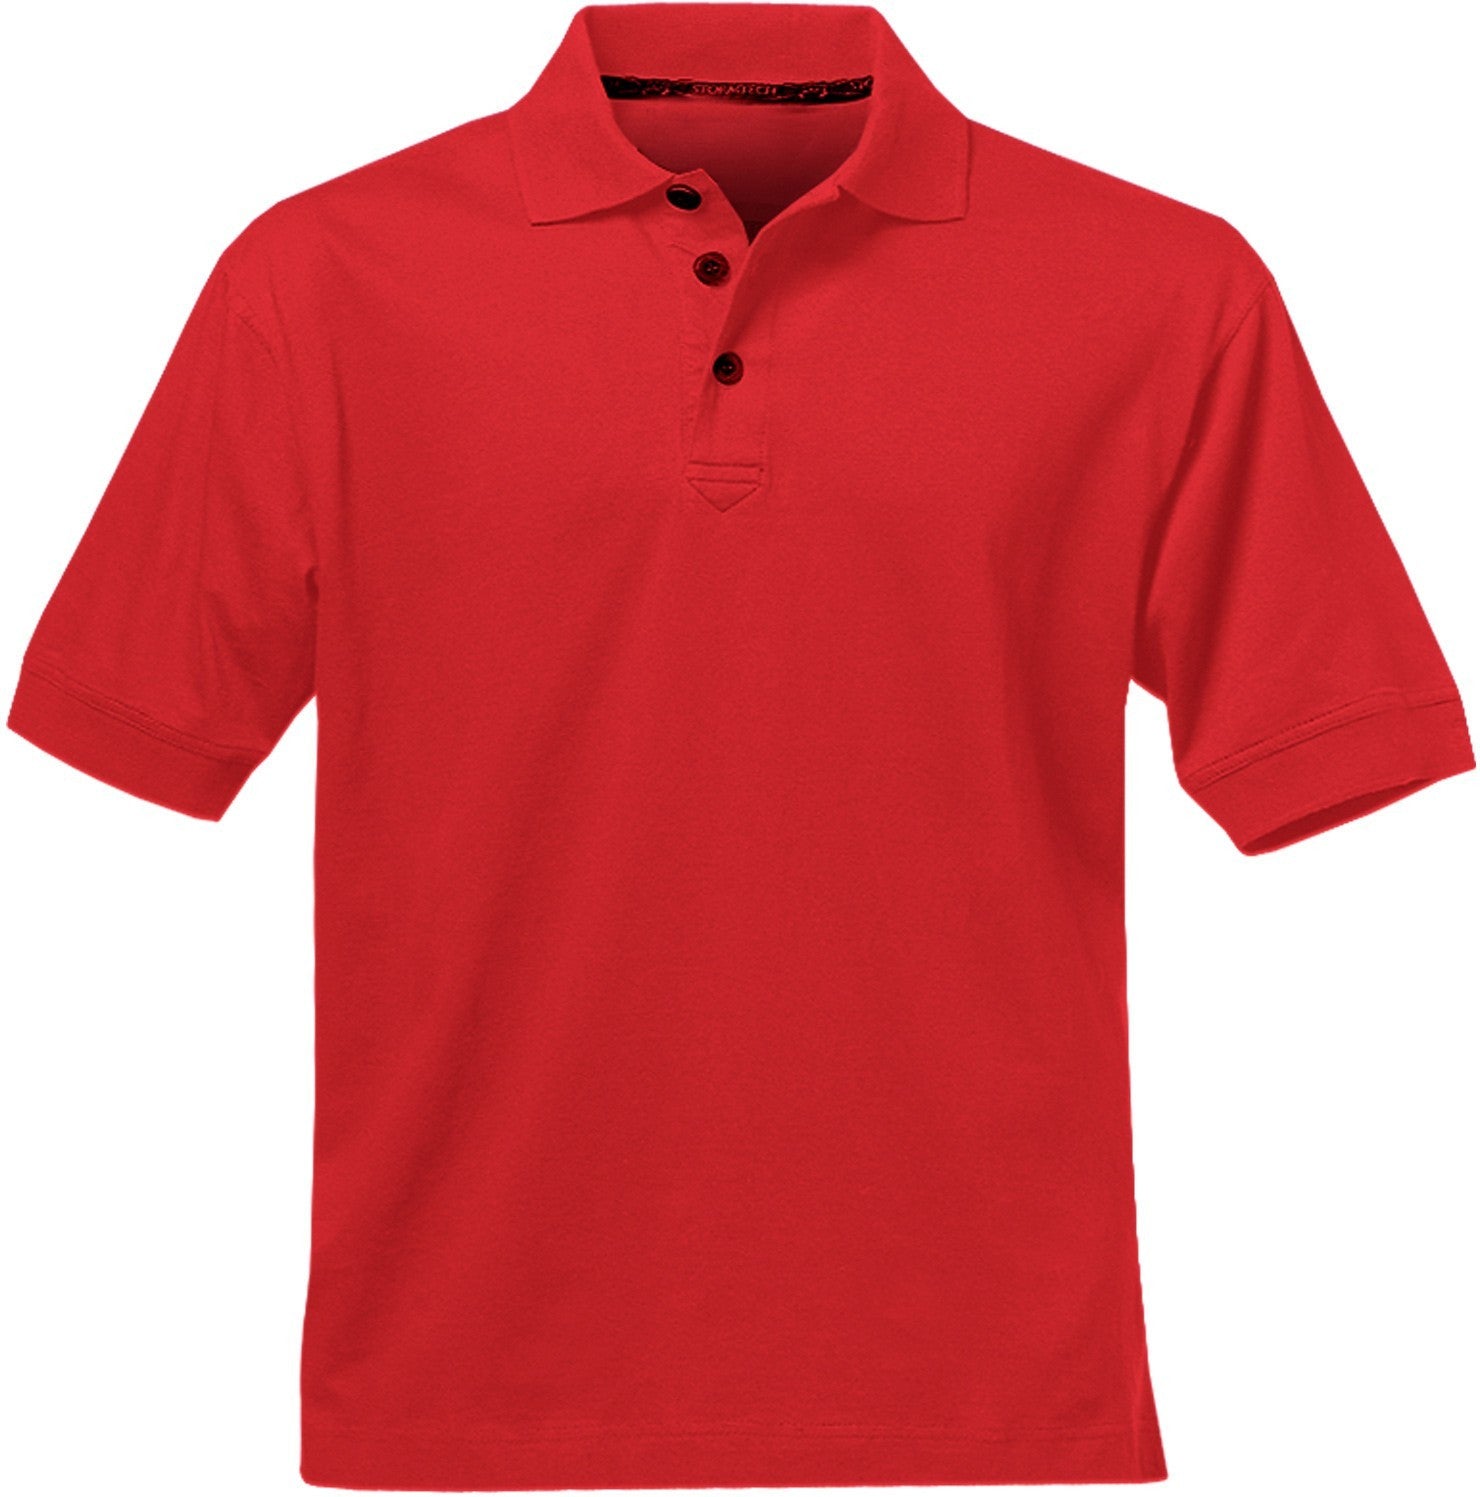 Assorted Polo Shirts, On Line Clearance 70% off - Growing Kids